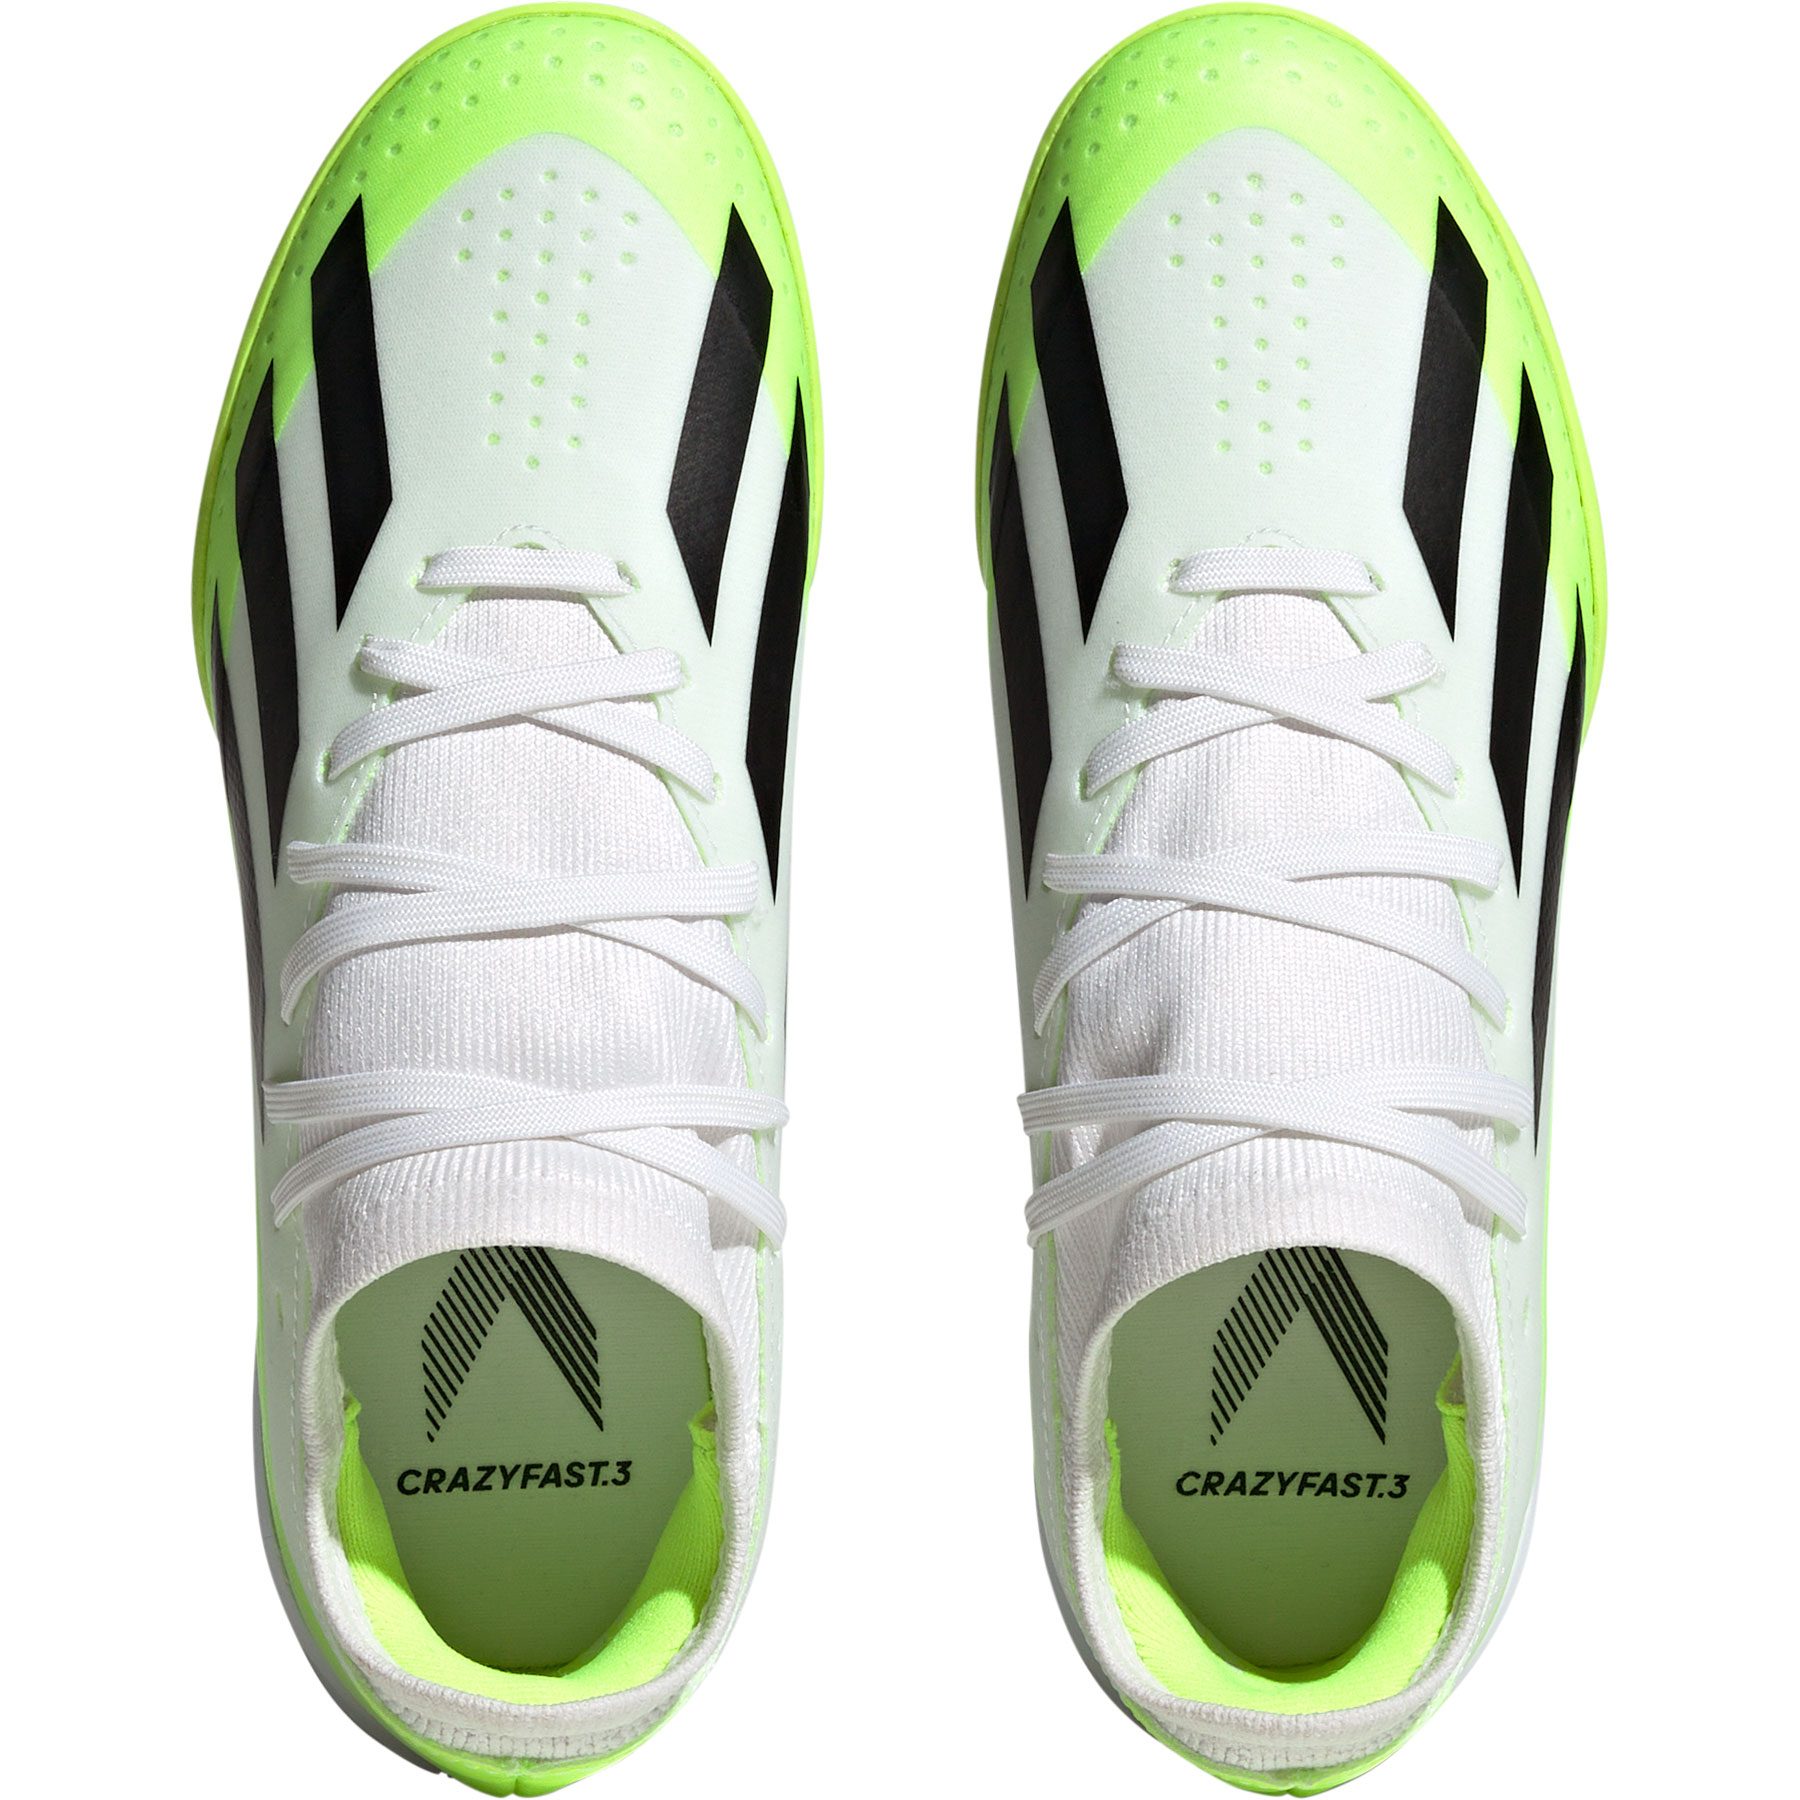 Crazyfast.3 Shoes football at Kids Football Bittl Shop adidas IN Sport - X white